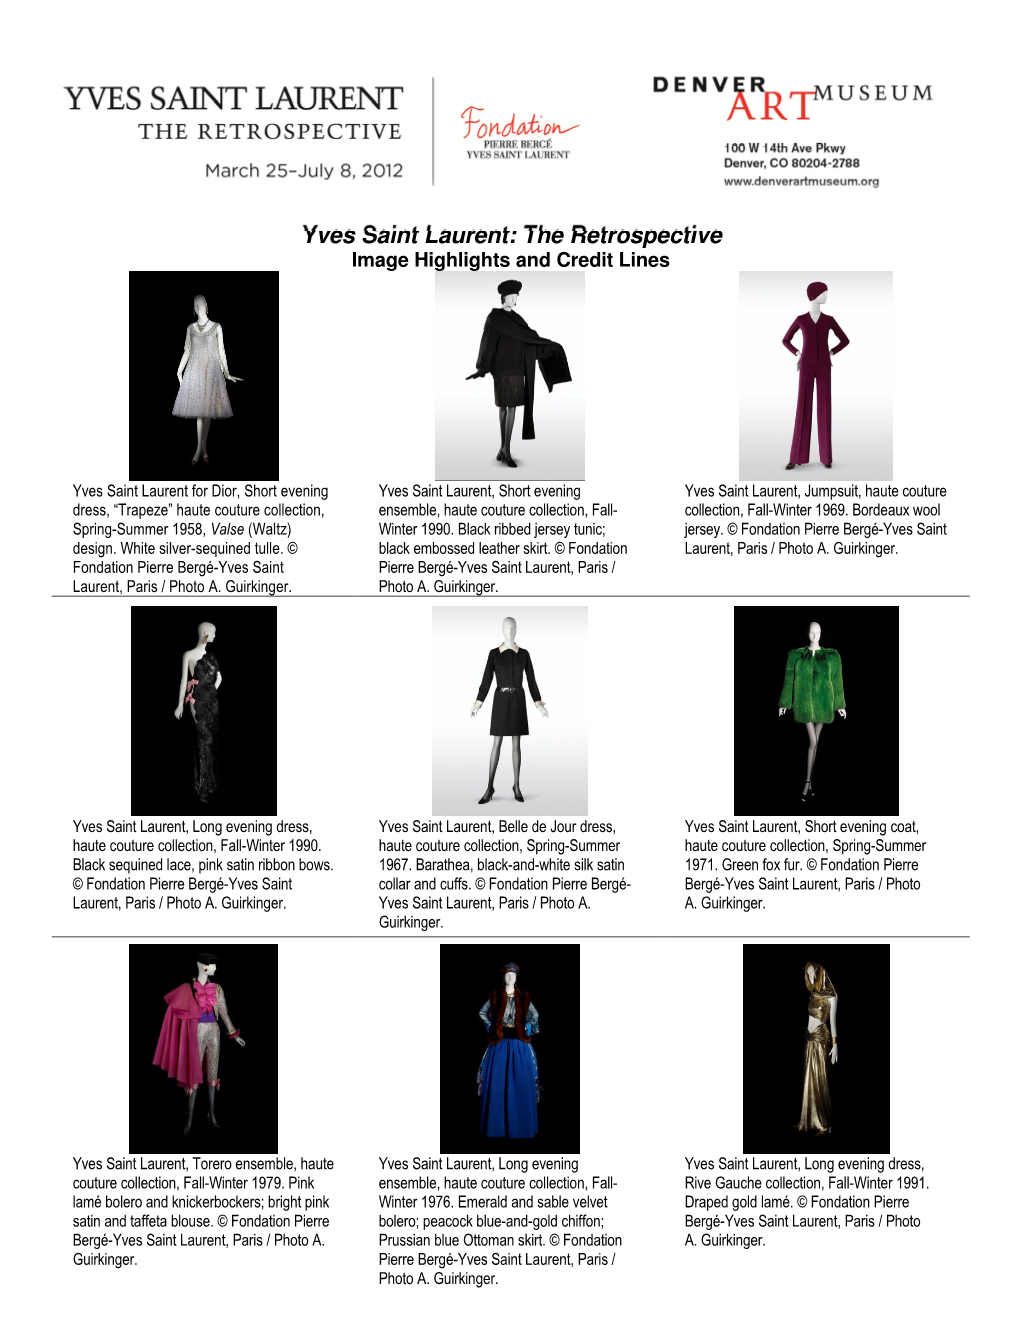 Yves Saint Laurent: the Retrospective Image Highlights and Credit Lines